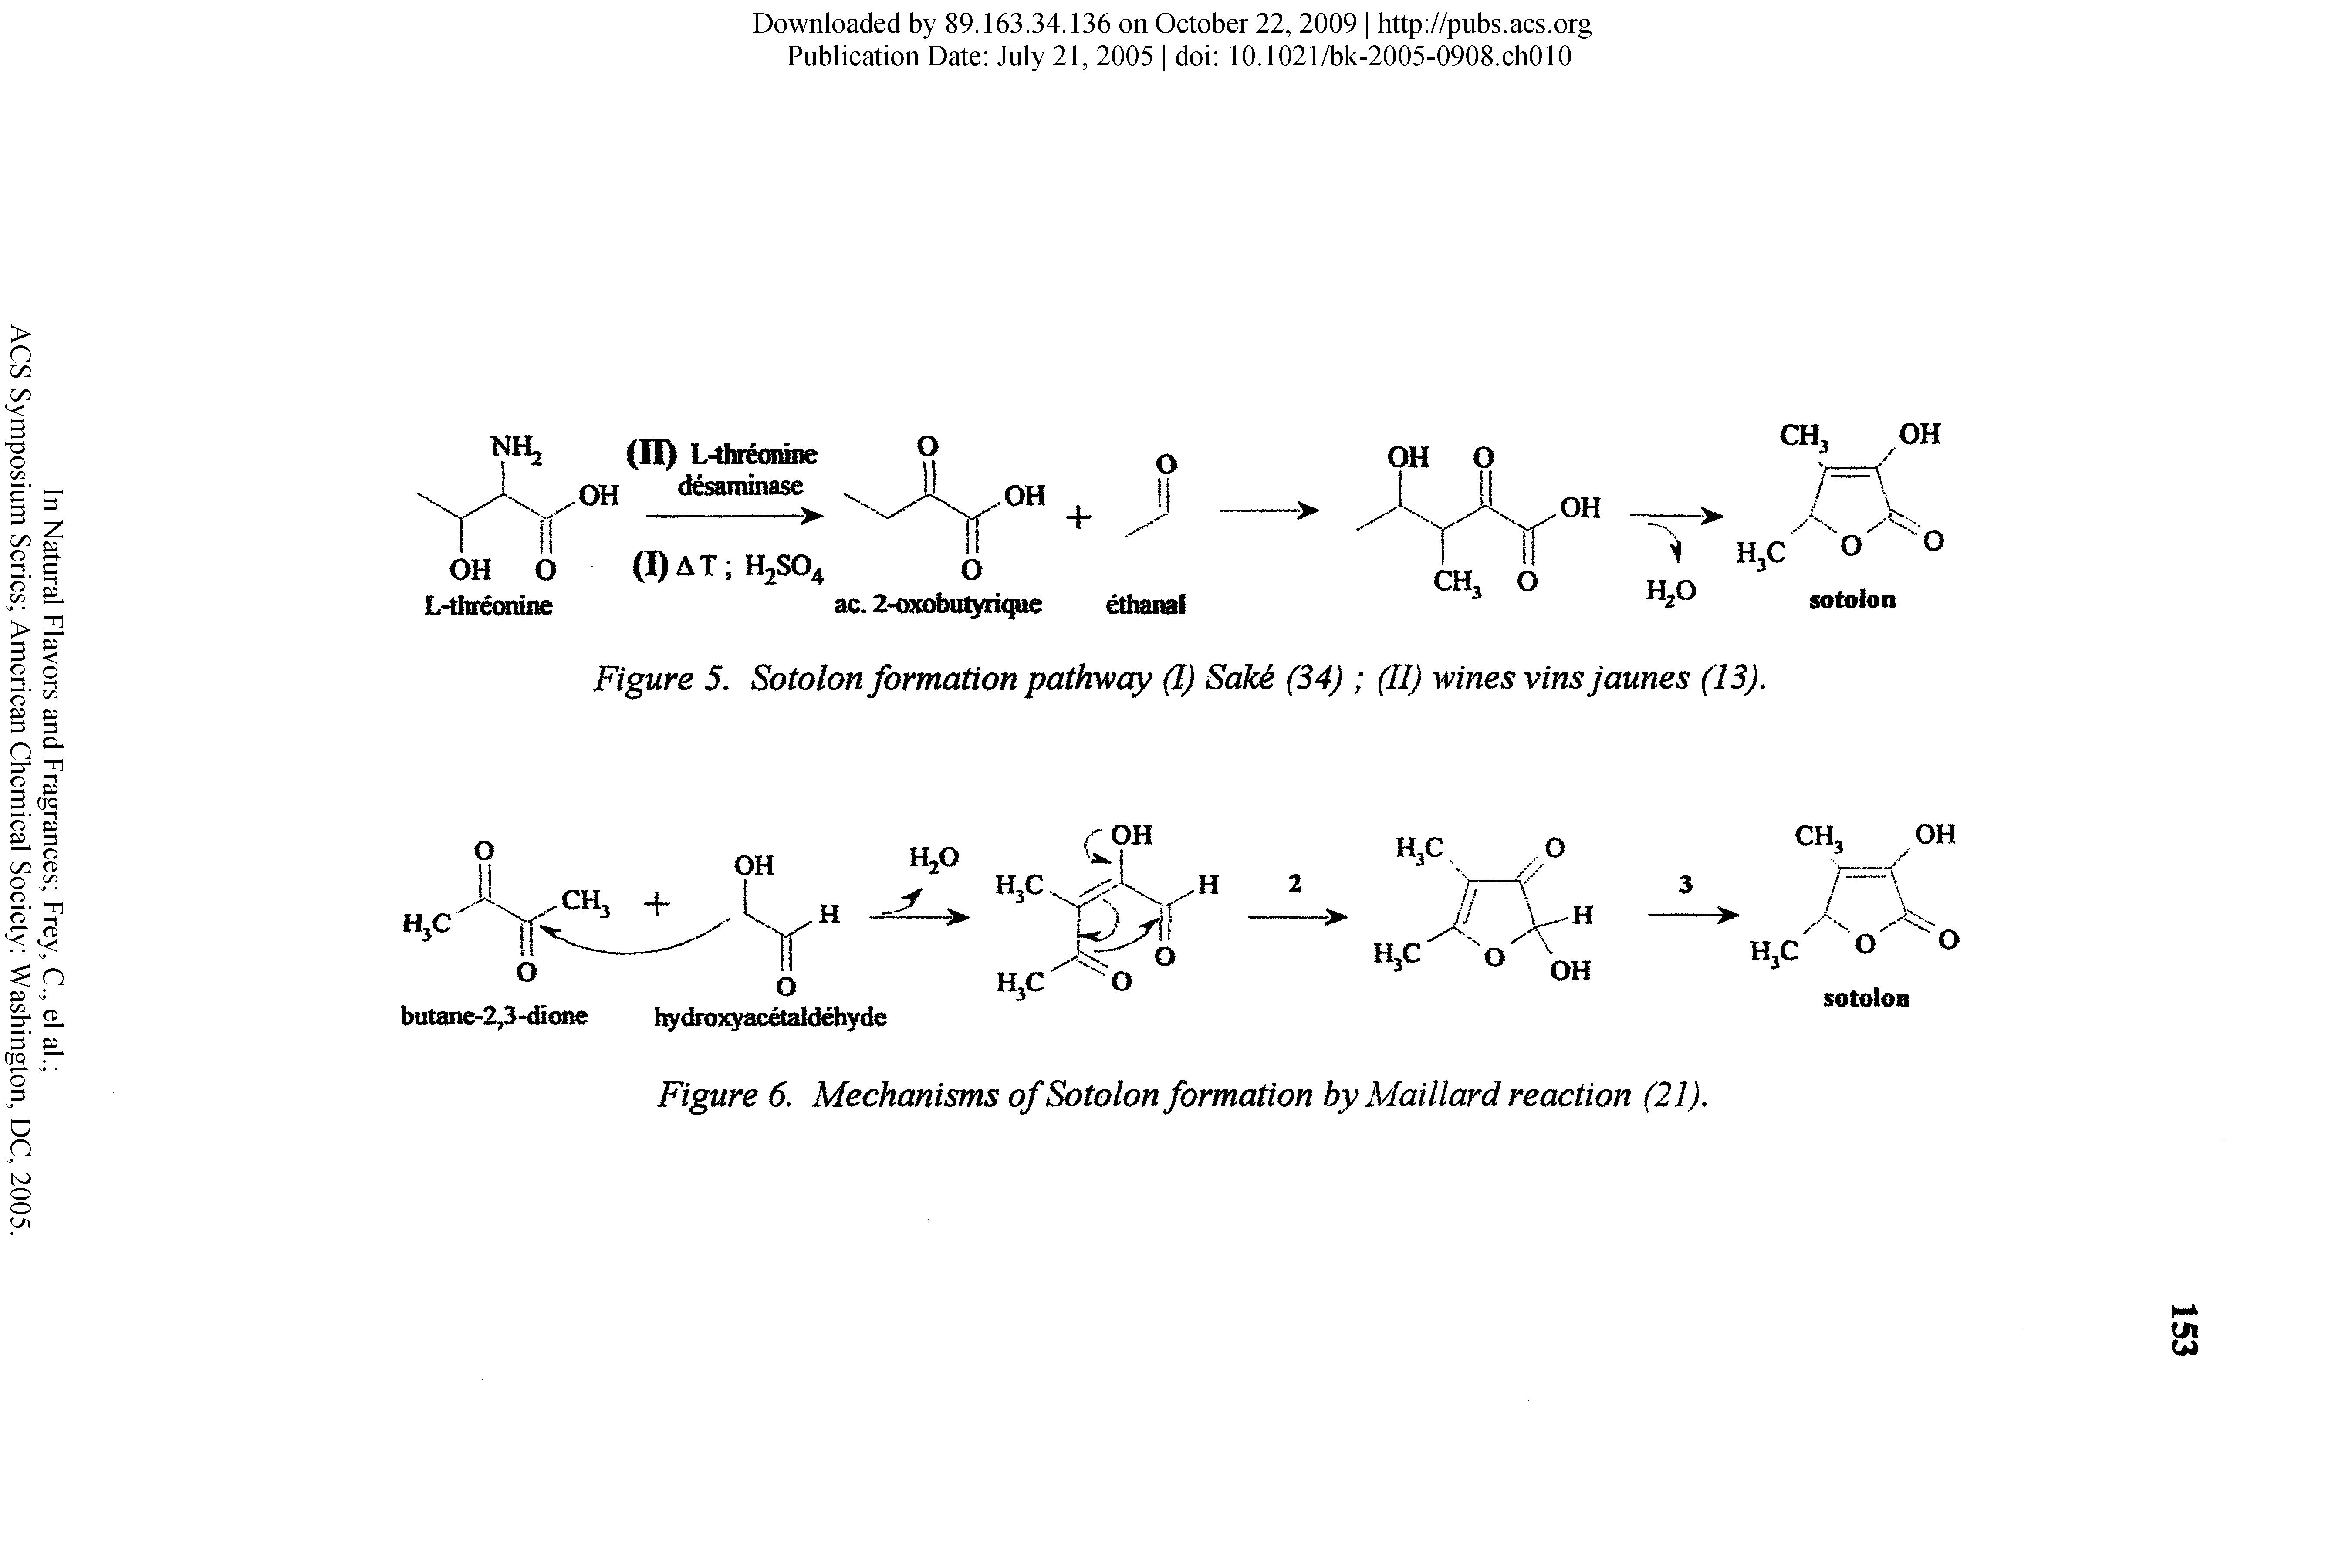 Figure 6. Mechanisms of Sotoion formation by Maillard reaction (21).